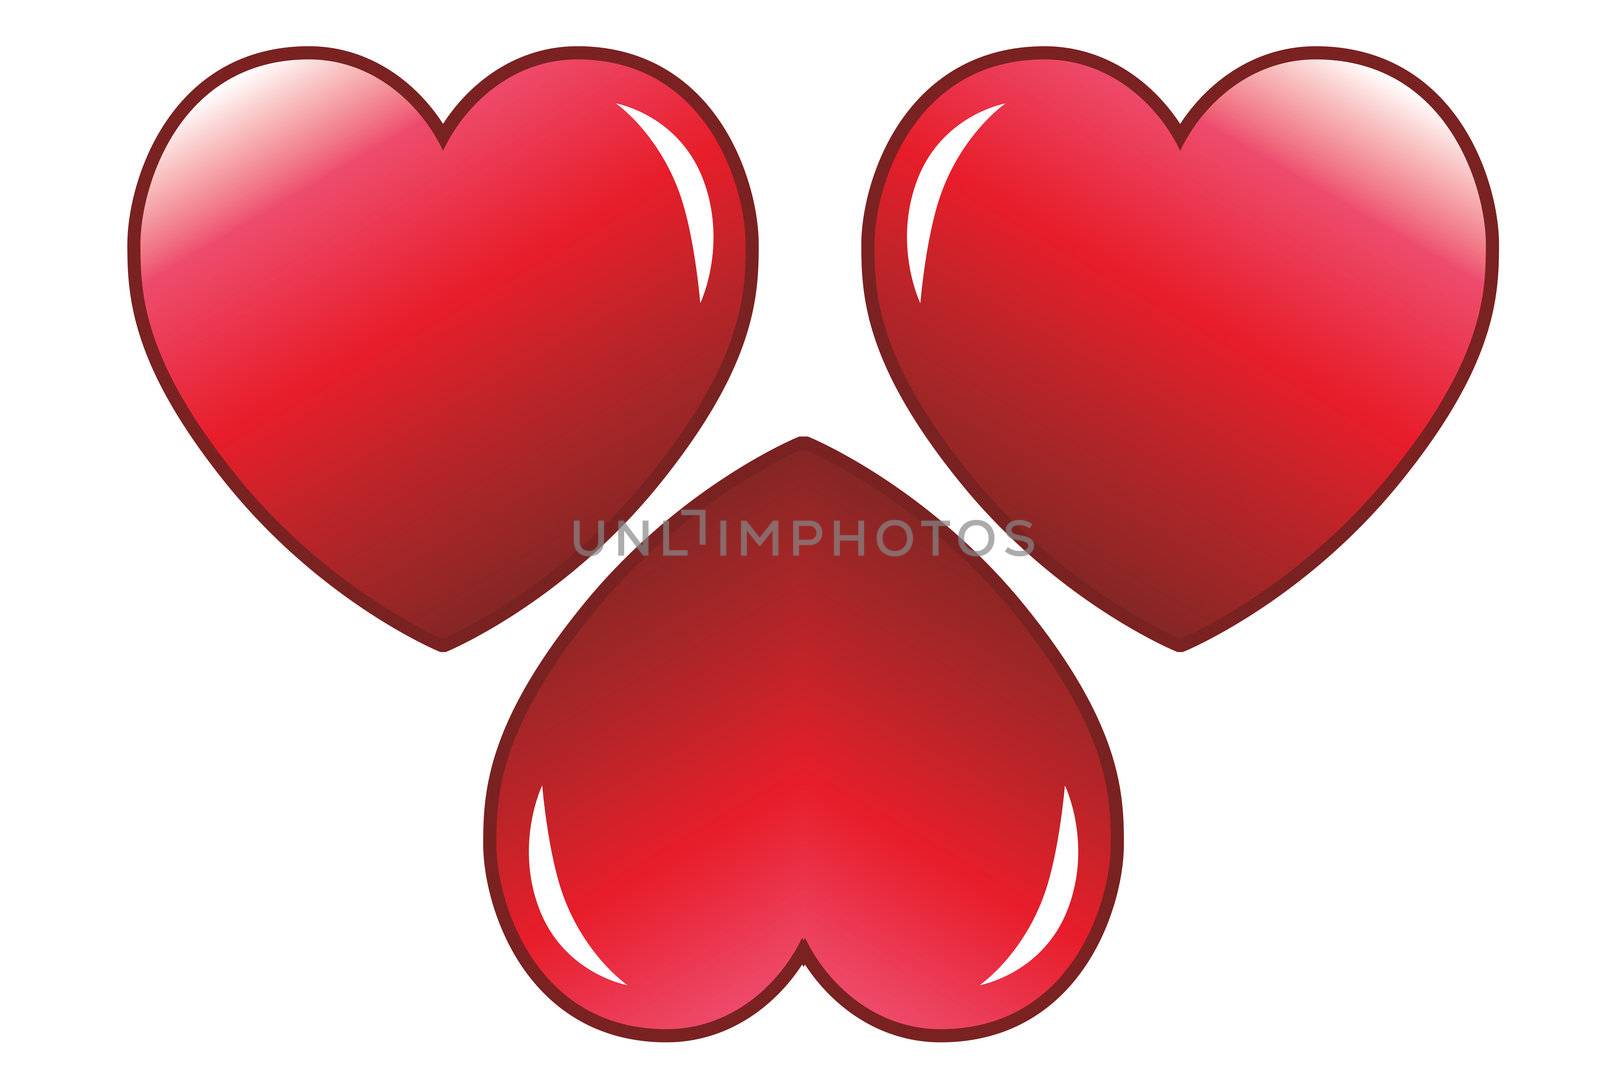 Here you can see three nice hearts